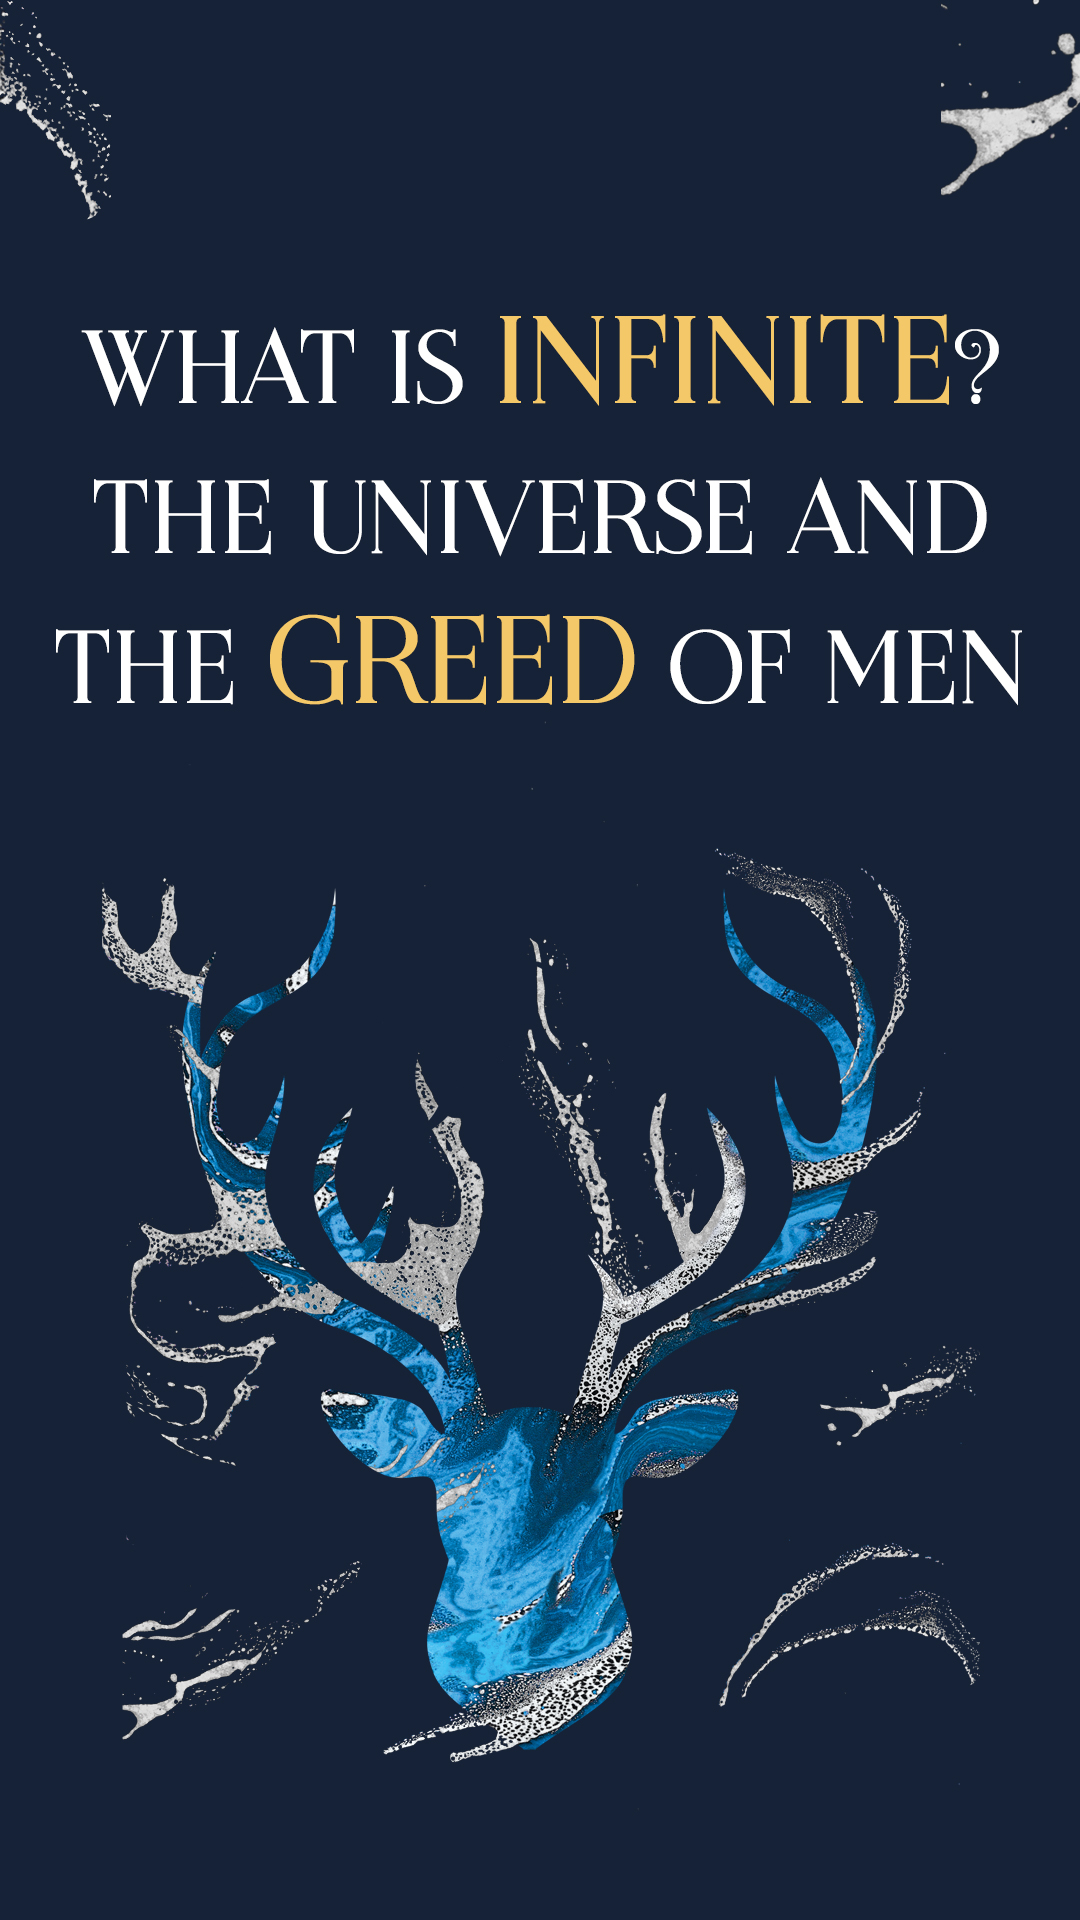 Book cover with the title "what is infinite? the universe and the greed of men" depicted in white and blue text, featuring an illustration of a stylized blue and white tree against a dark background.